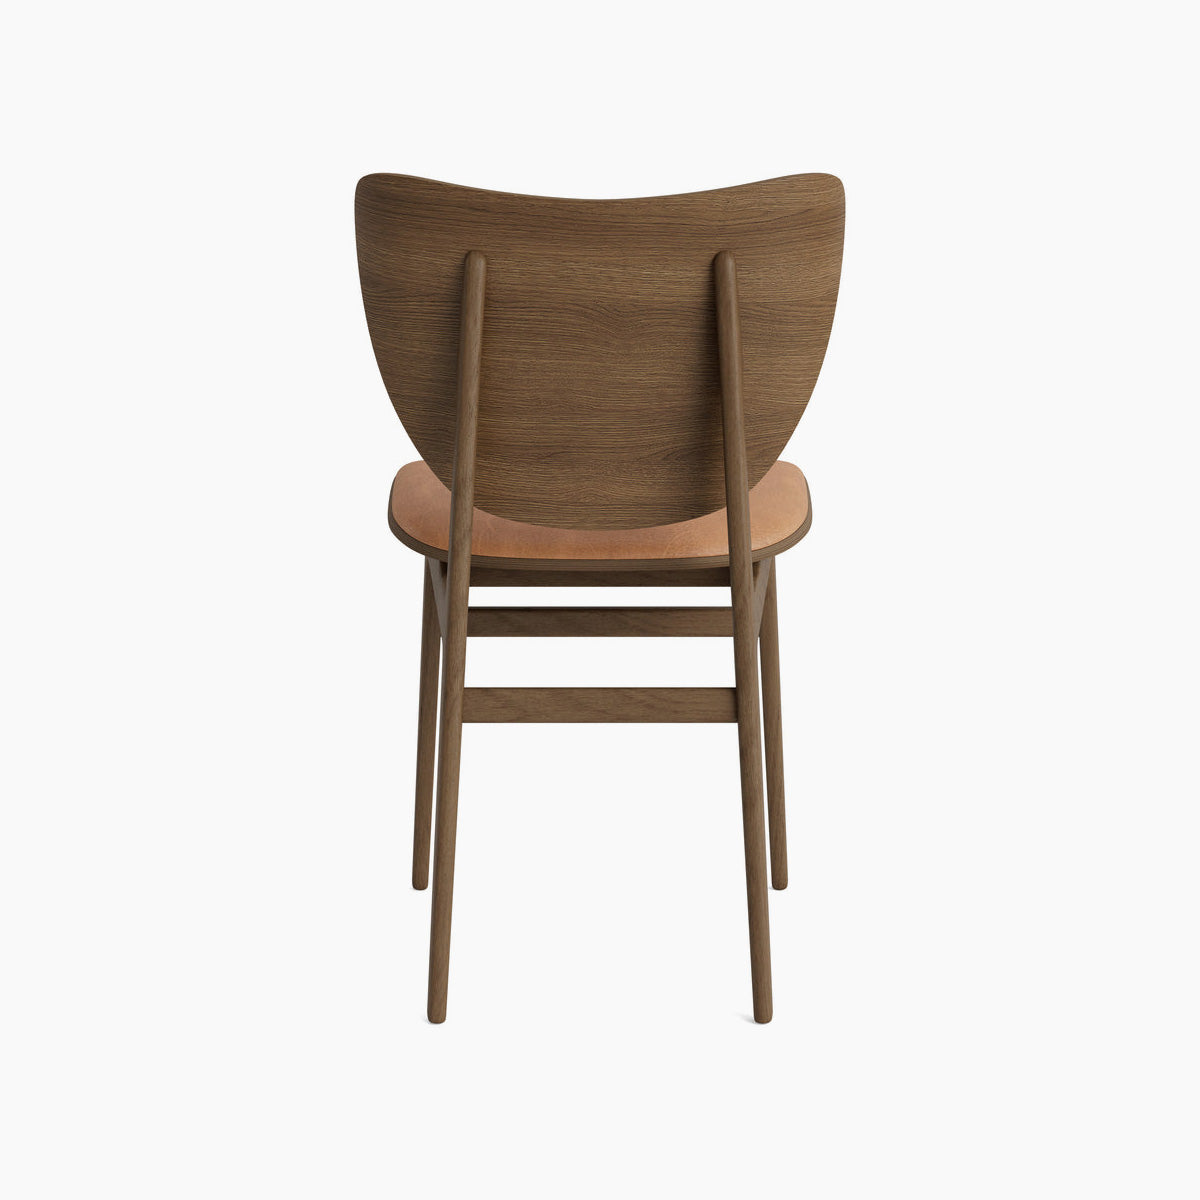 Elephant Chair - Leather Front Upholstery